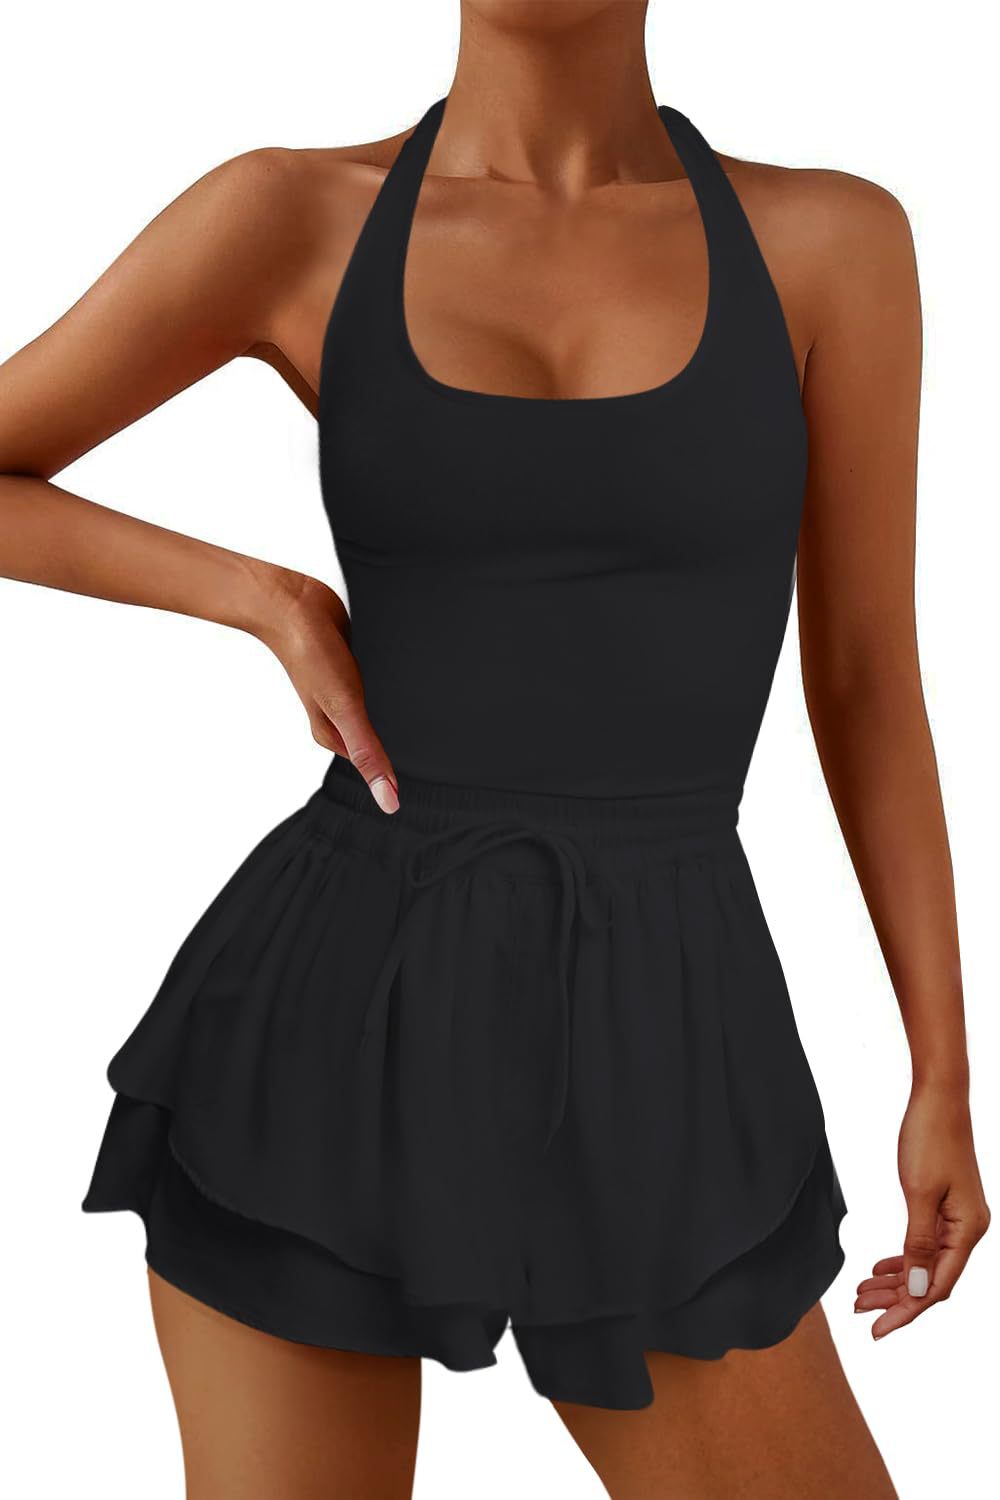 Shewin Wholesale Chic Female Black Cross Criss Back Drawstring Layered SHORT Rompers